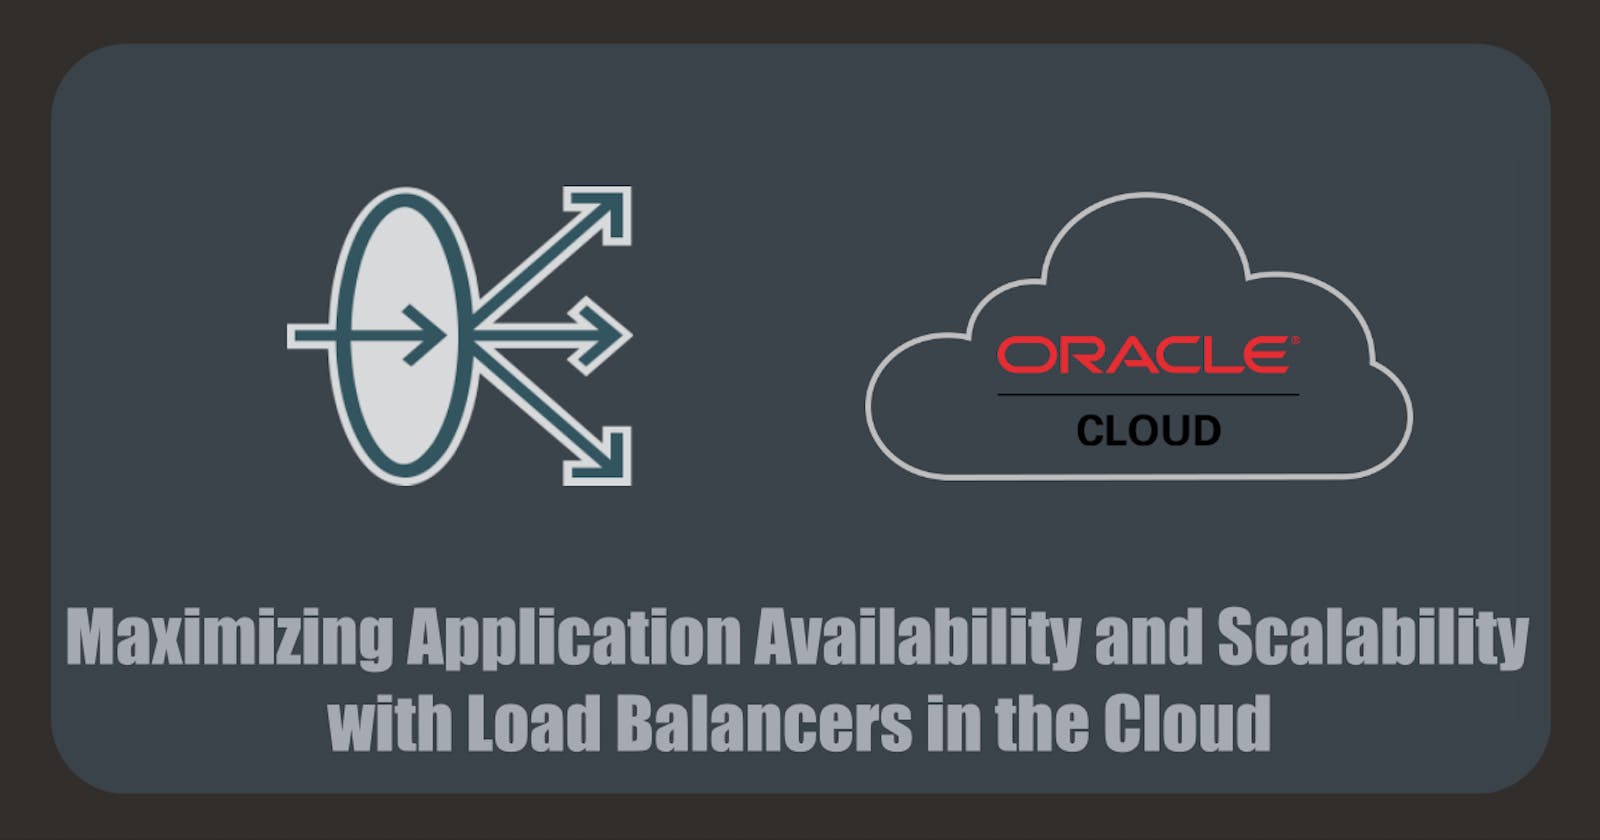 Maximizing Application Availability and Scalability with Load Balancers in the Cloud